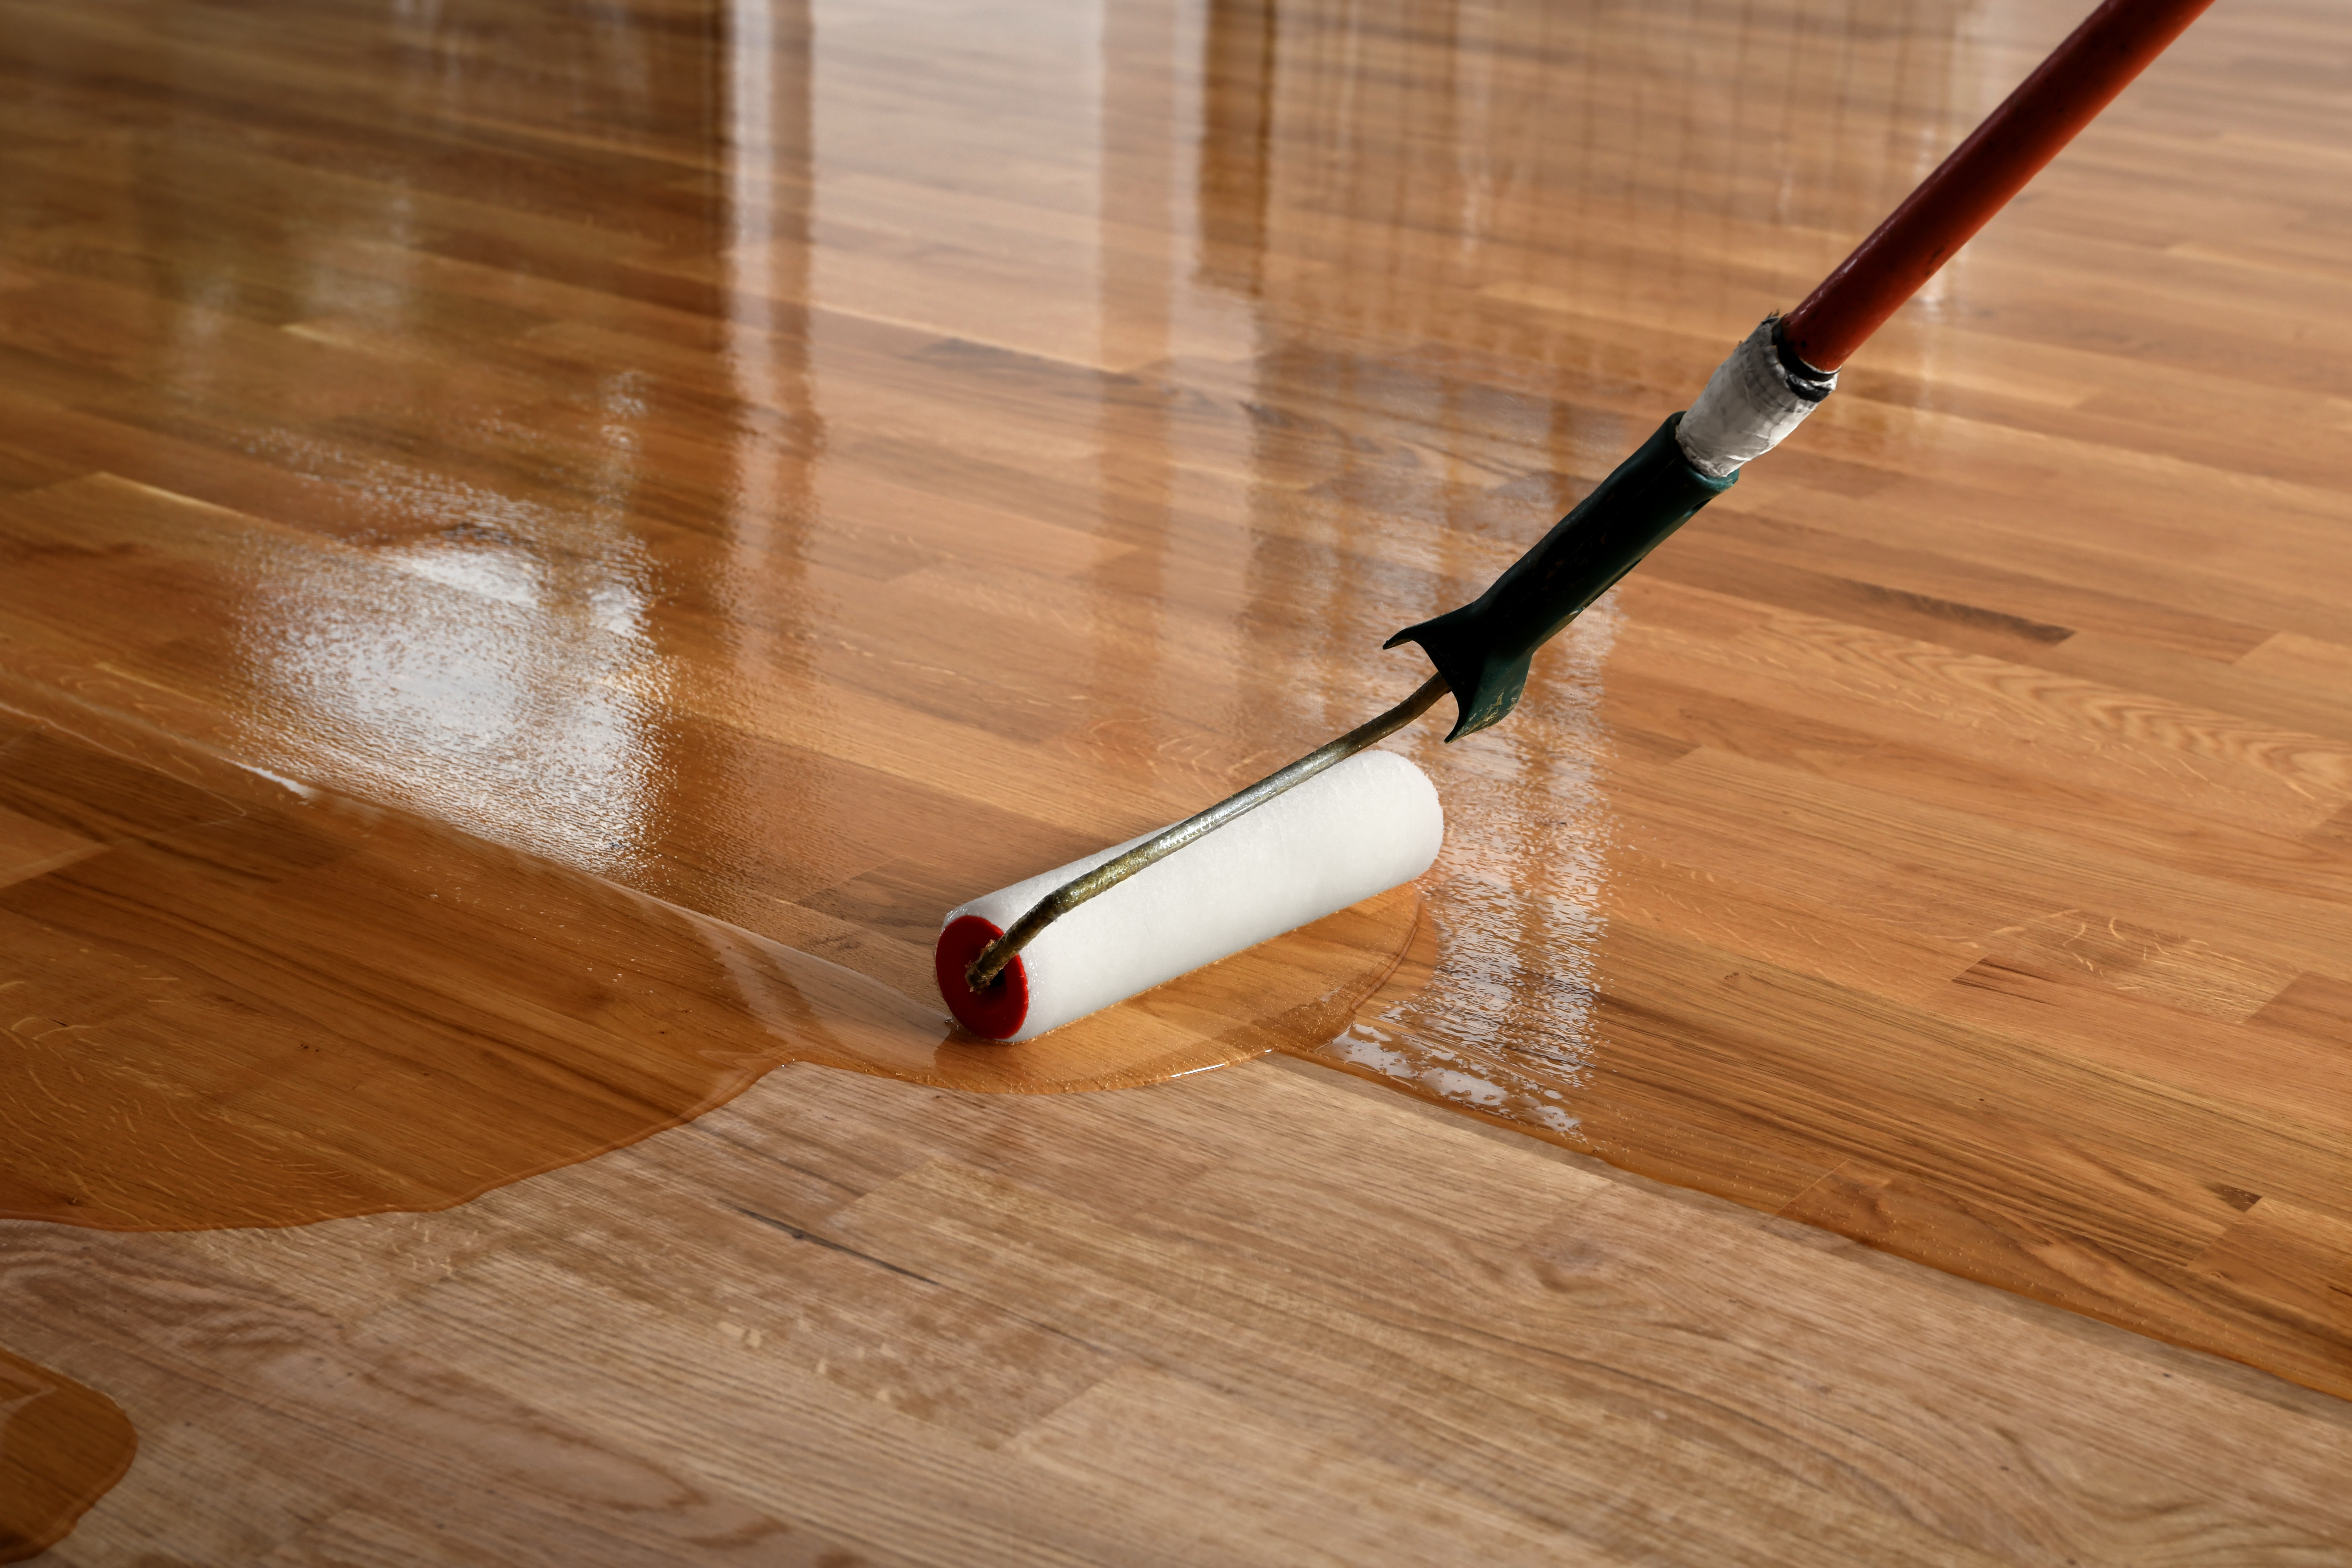 The process of lacquering wood floors involves a skilled worker using a roller to evenly apply the coating, resulting in a beautifully finished surface in Sydenham, SE26.